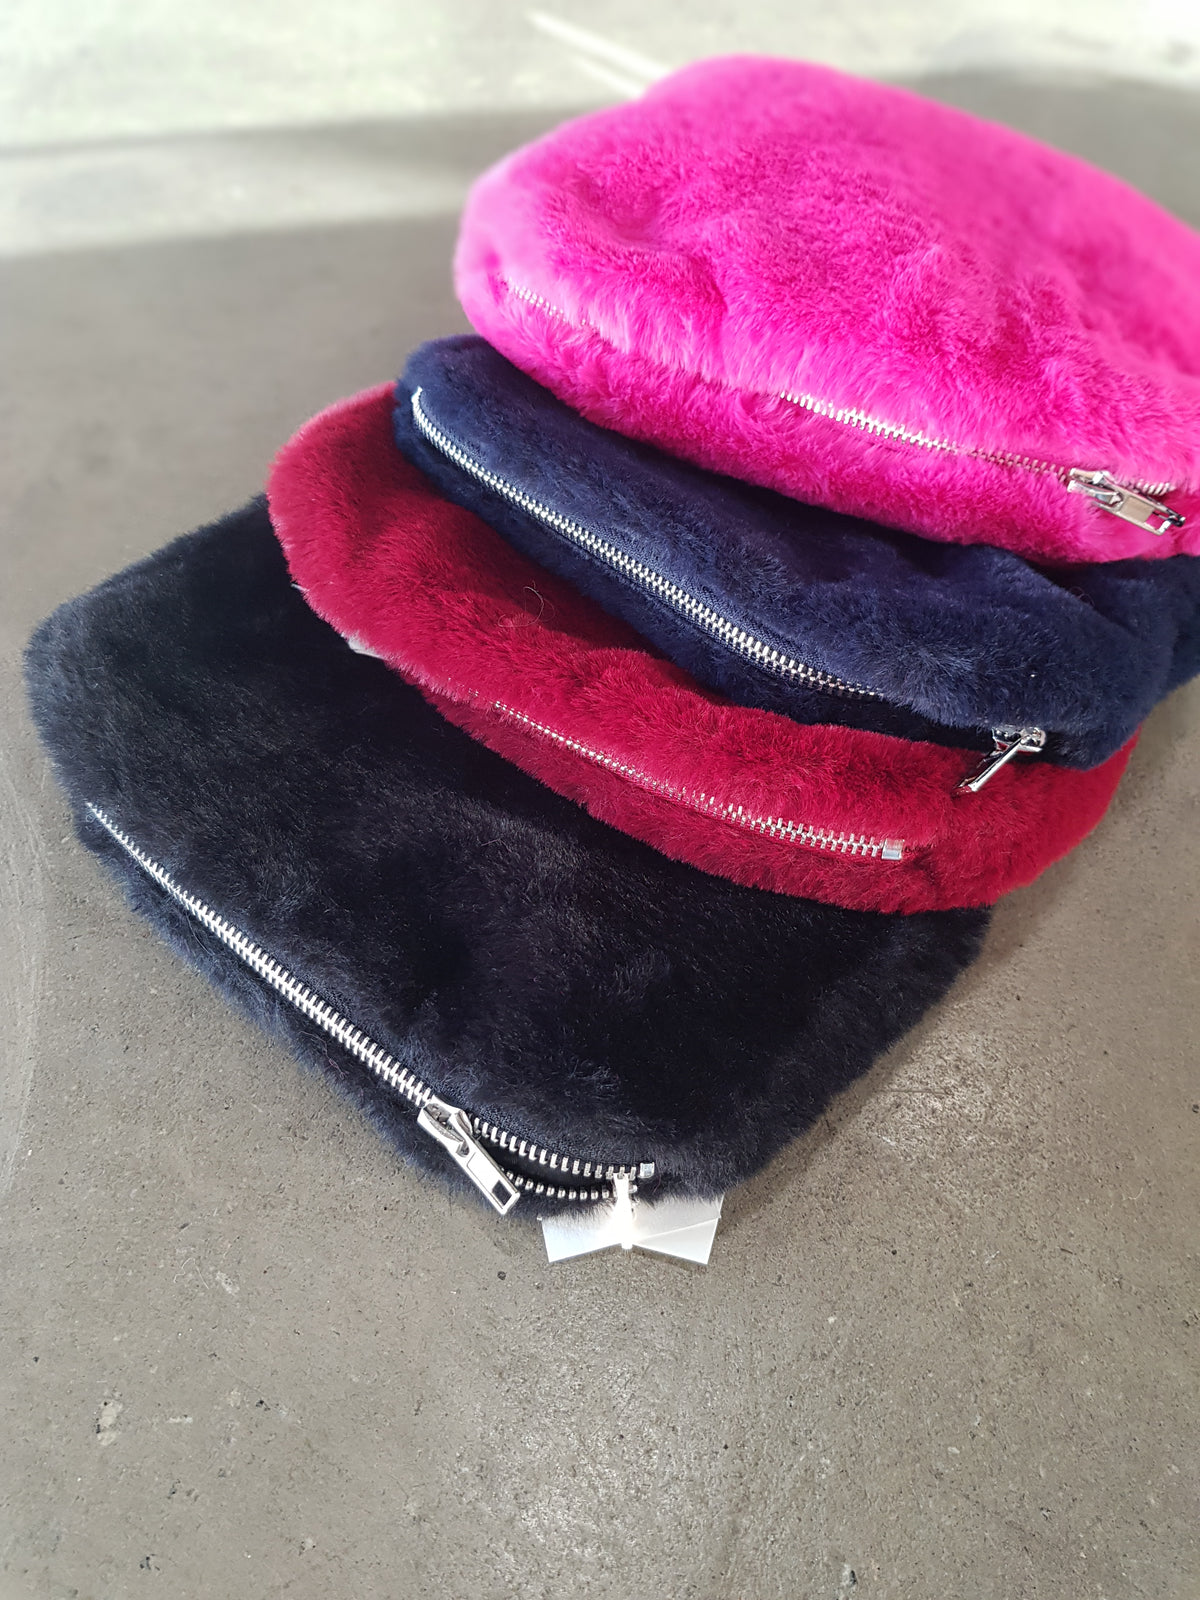 Barry Made - Faux Fur Clutch Navy